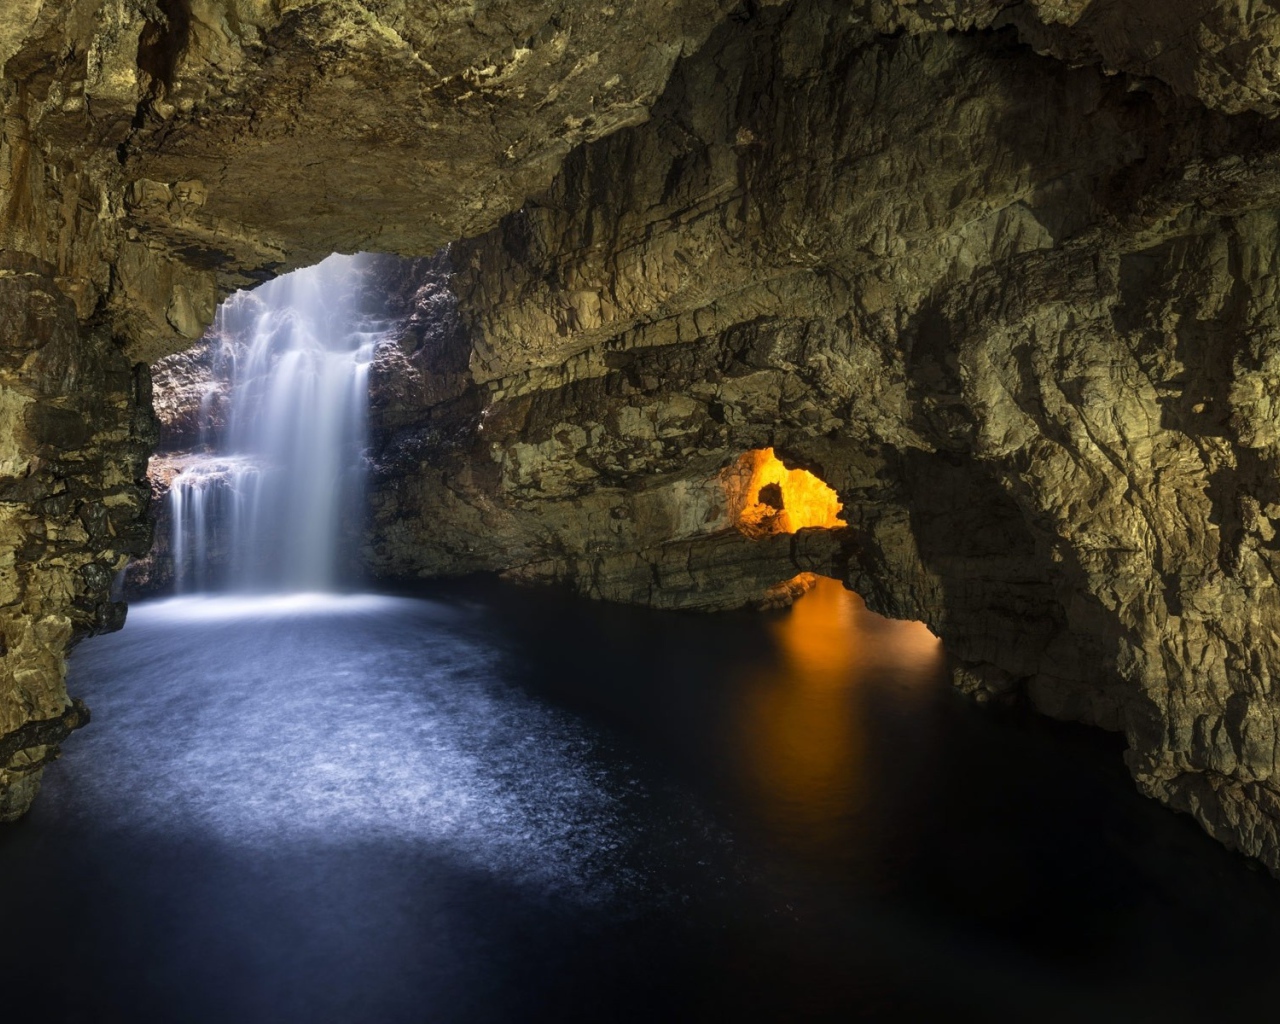 Waterfall in a stone cave in Scotland